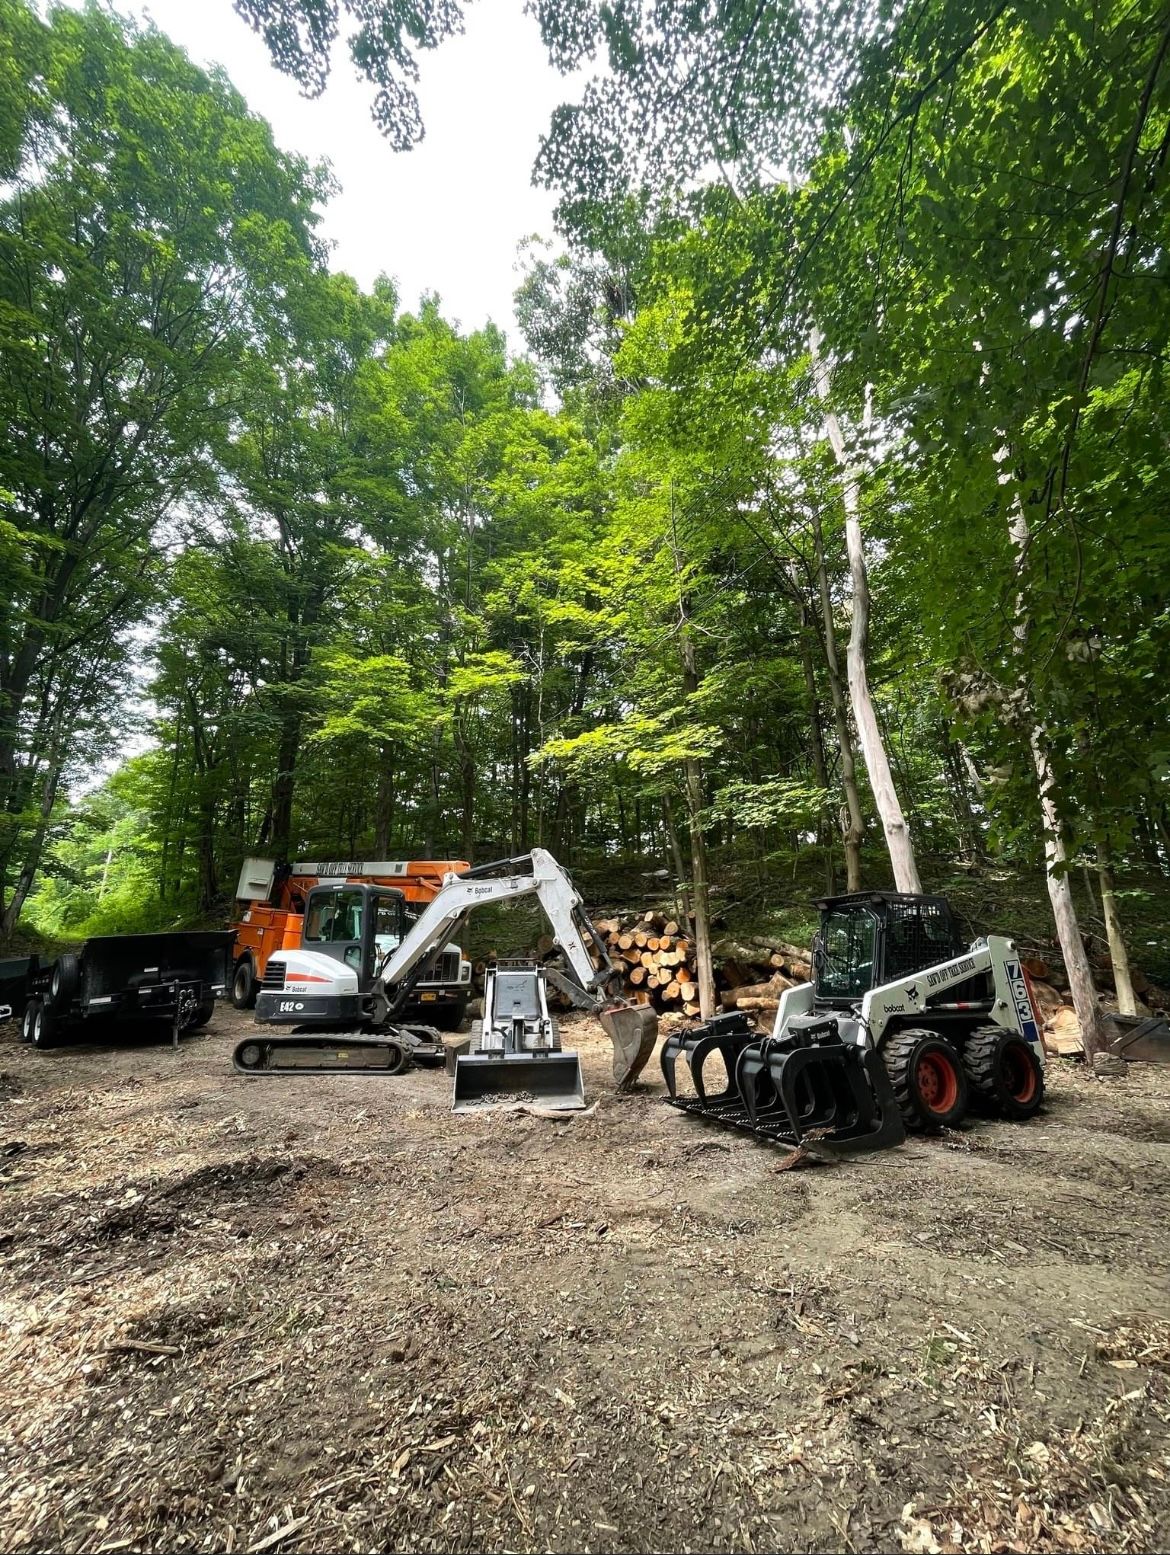 Tree Trimming — Bulldozer Clearing an Area in Poughkeepsie, NY